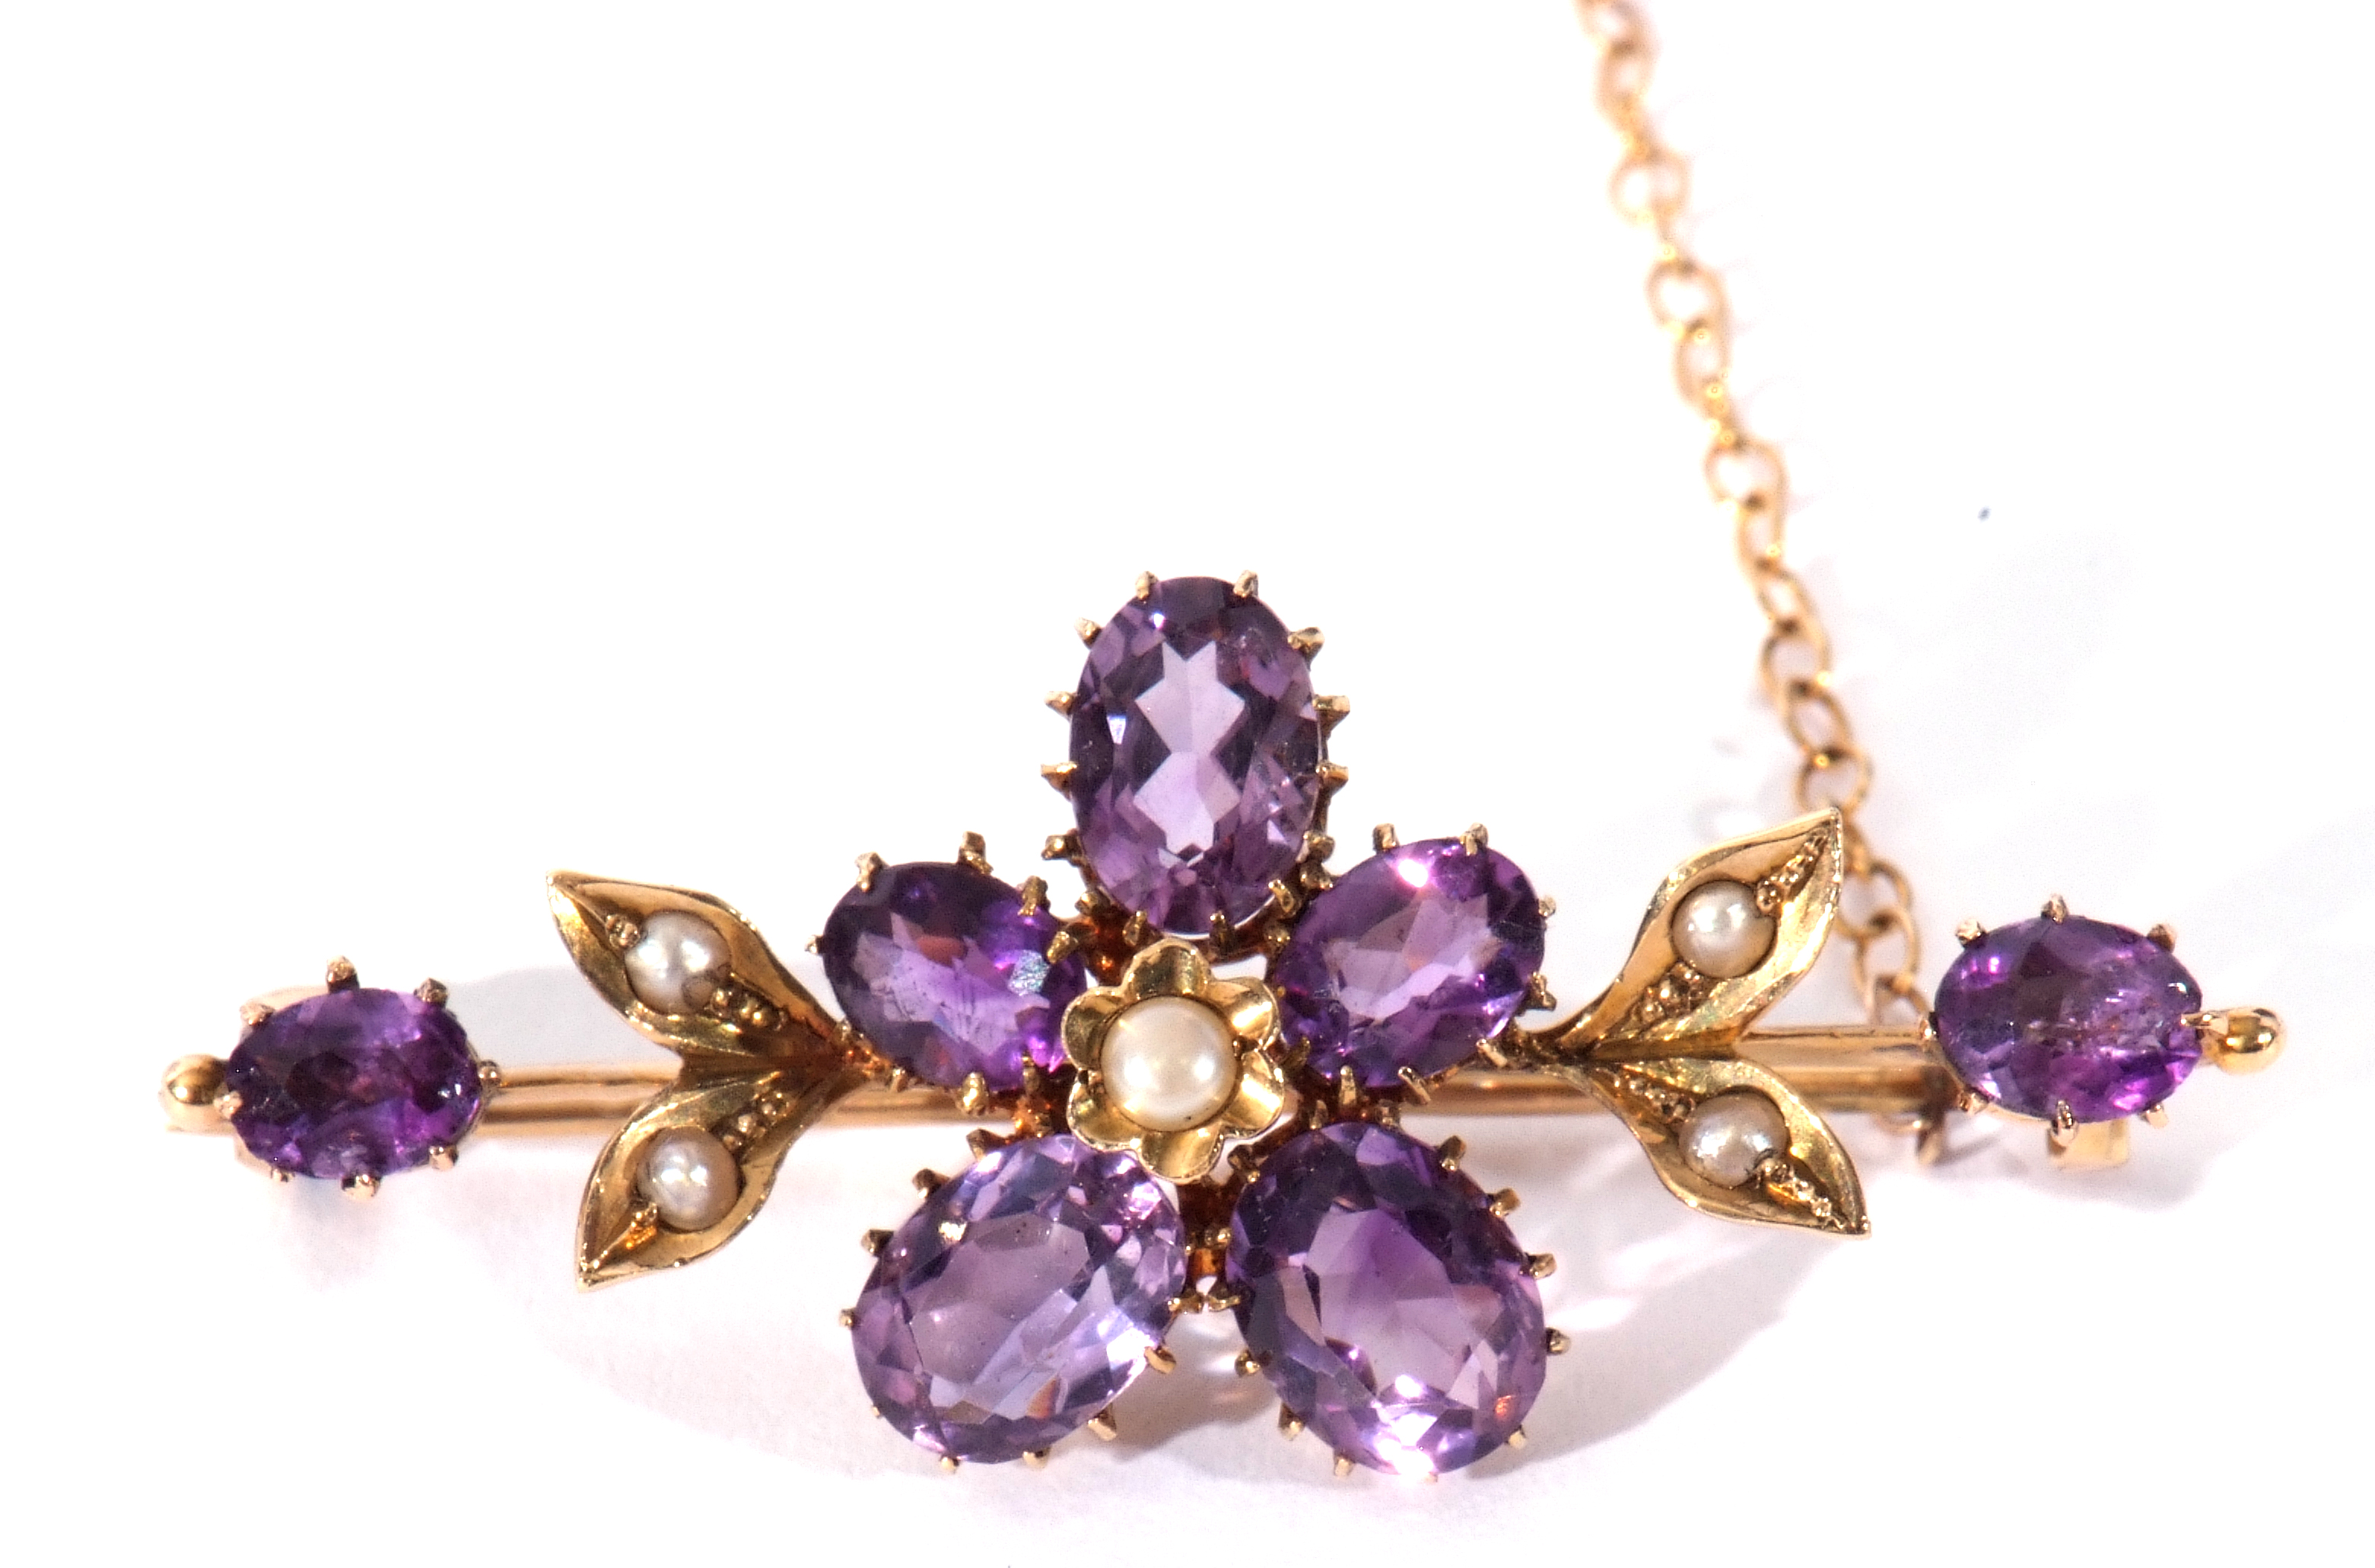 Victorian 18ct gold amethyst and seed pearl brooch, a flowerhead and bud design applied to a knife - Image 2 of 4